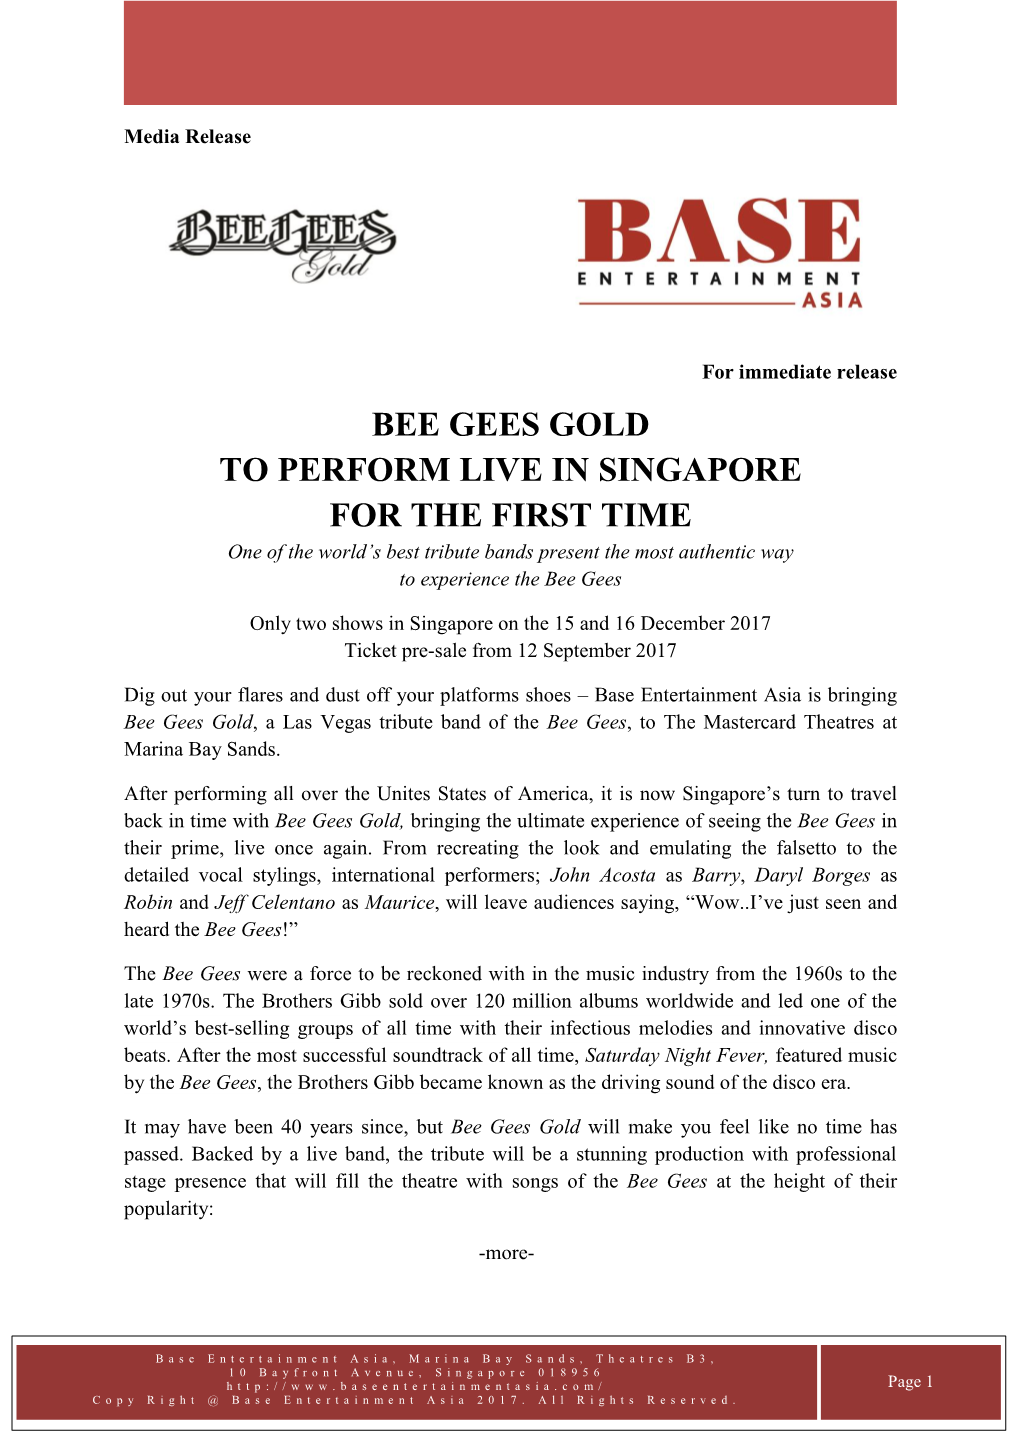 BEE GEES GOLD to PERFORM LIVE in SINGAPORE for the FIRST TIME One of the World’S Best Tribute Bands Present the Most Authentic Way to Experience the Bee Gees